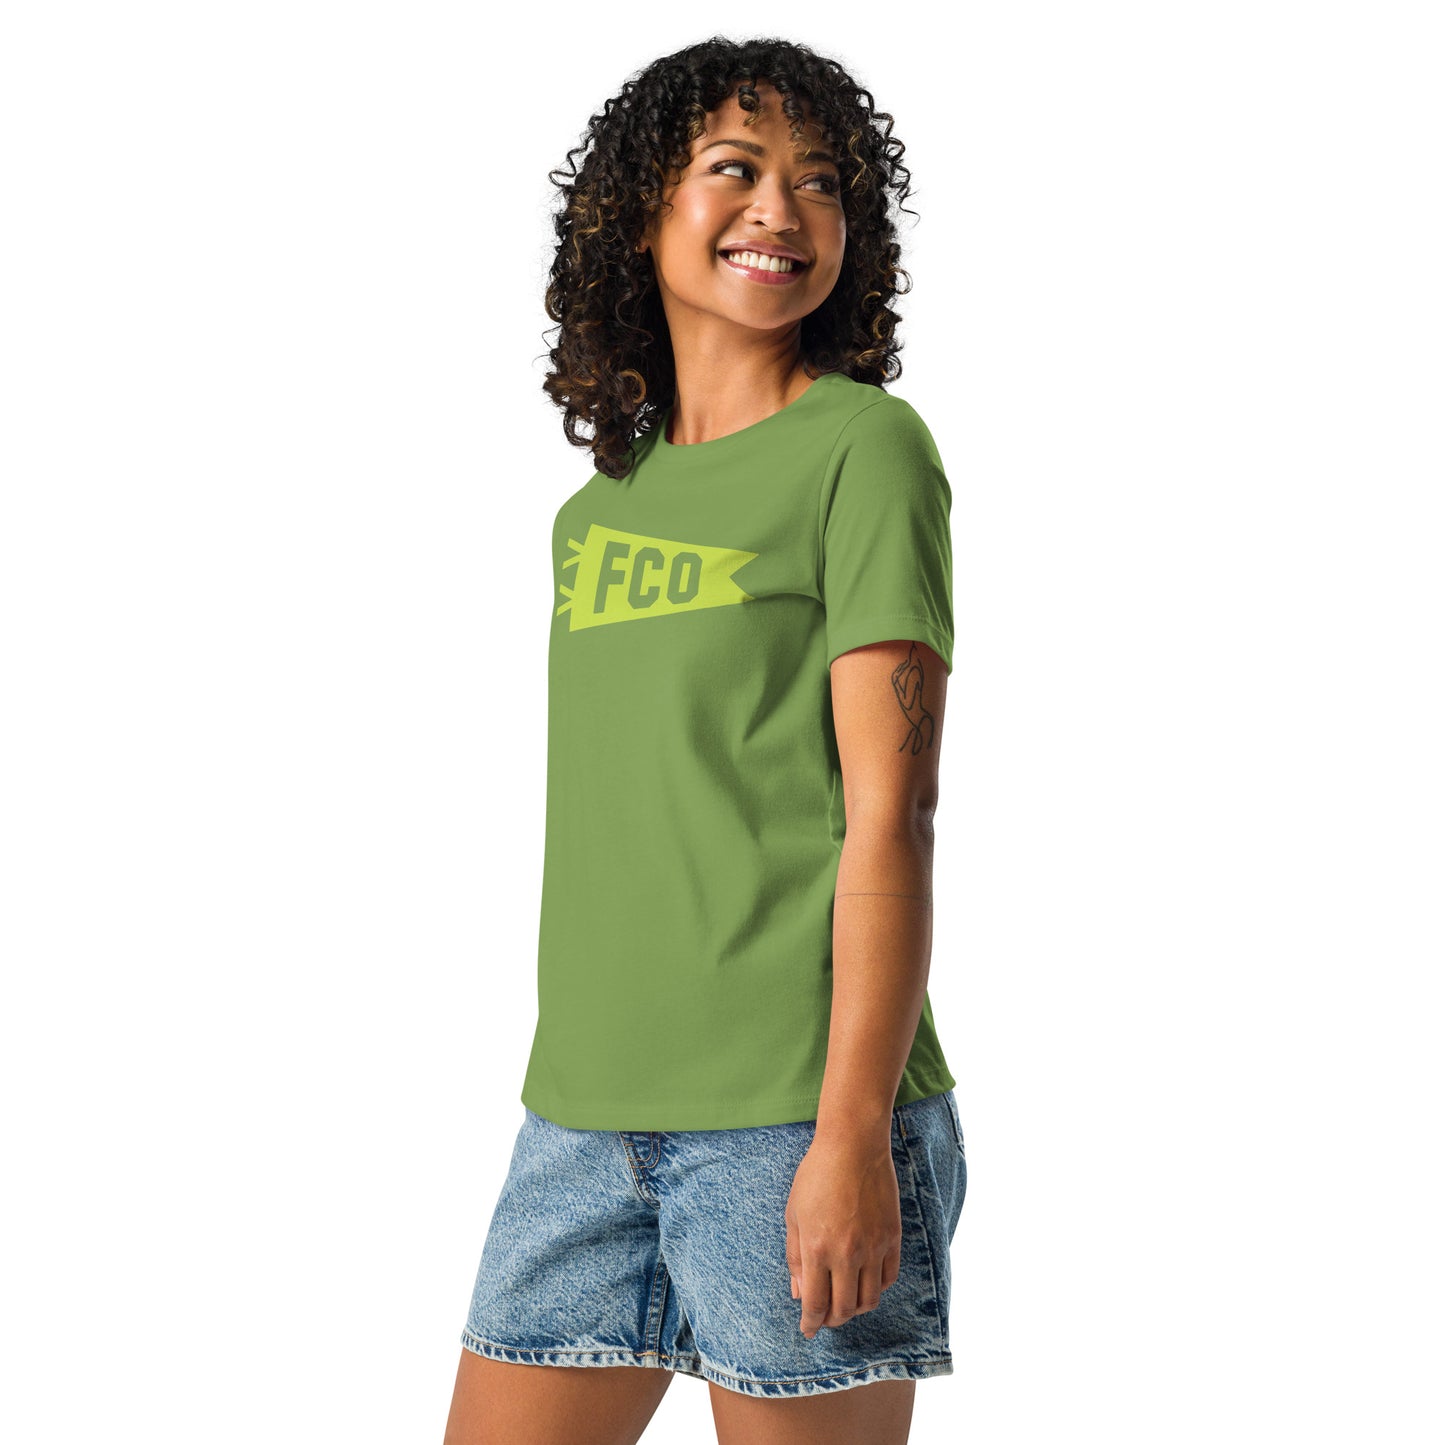 Airport Code Women's Tee - Green Graphic • FCO Rome • YHM Designs - Image 06